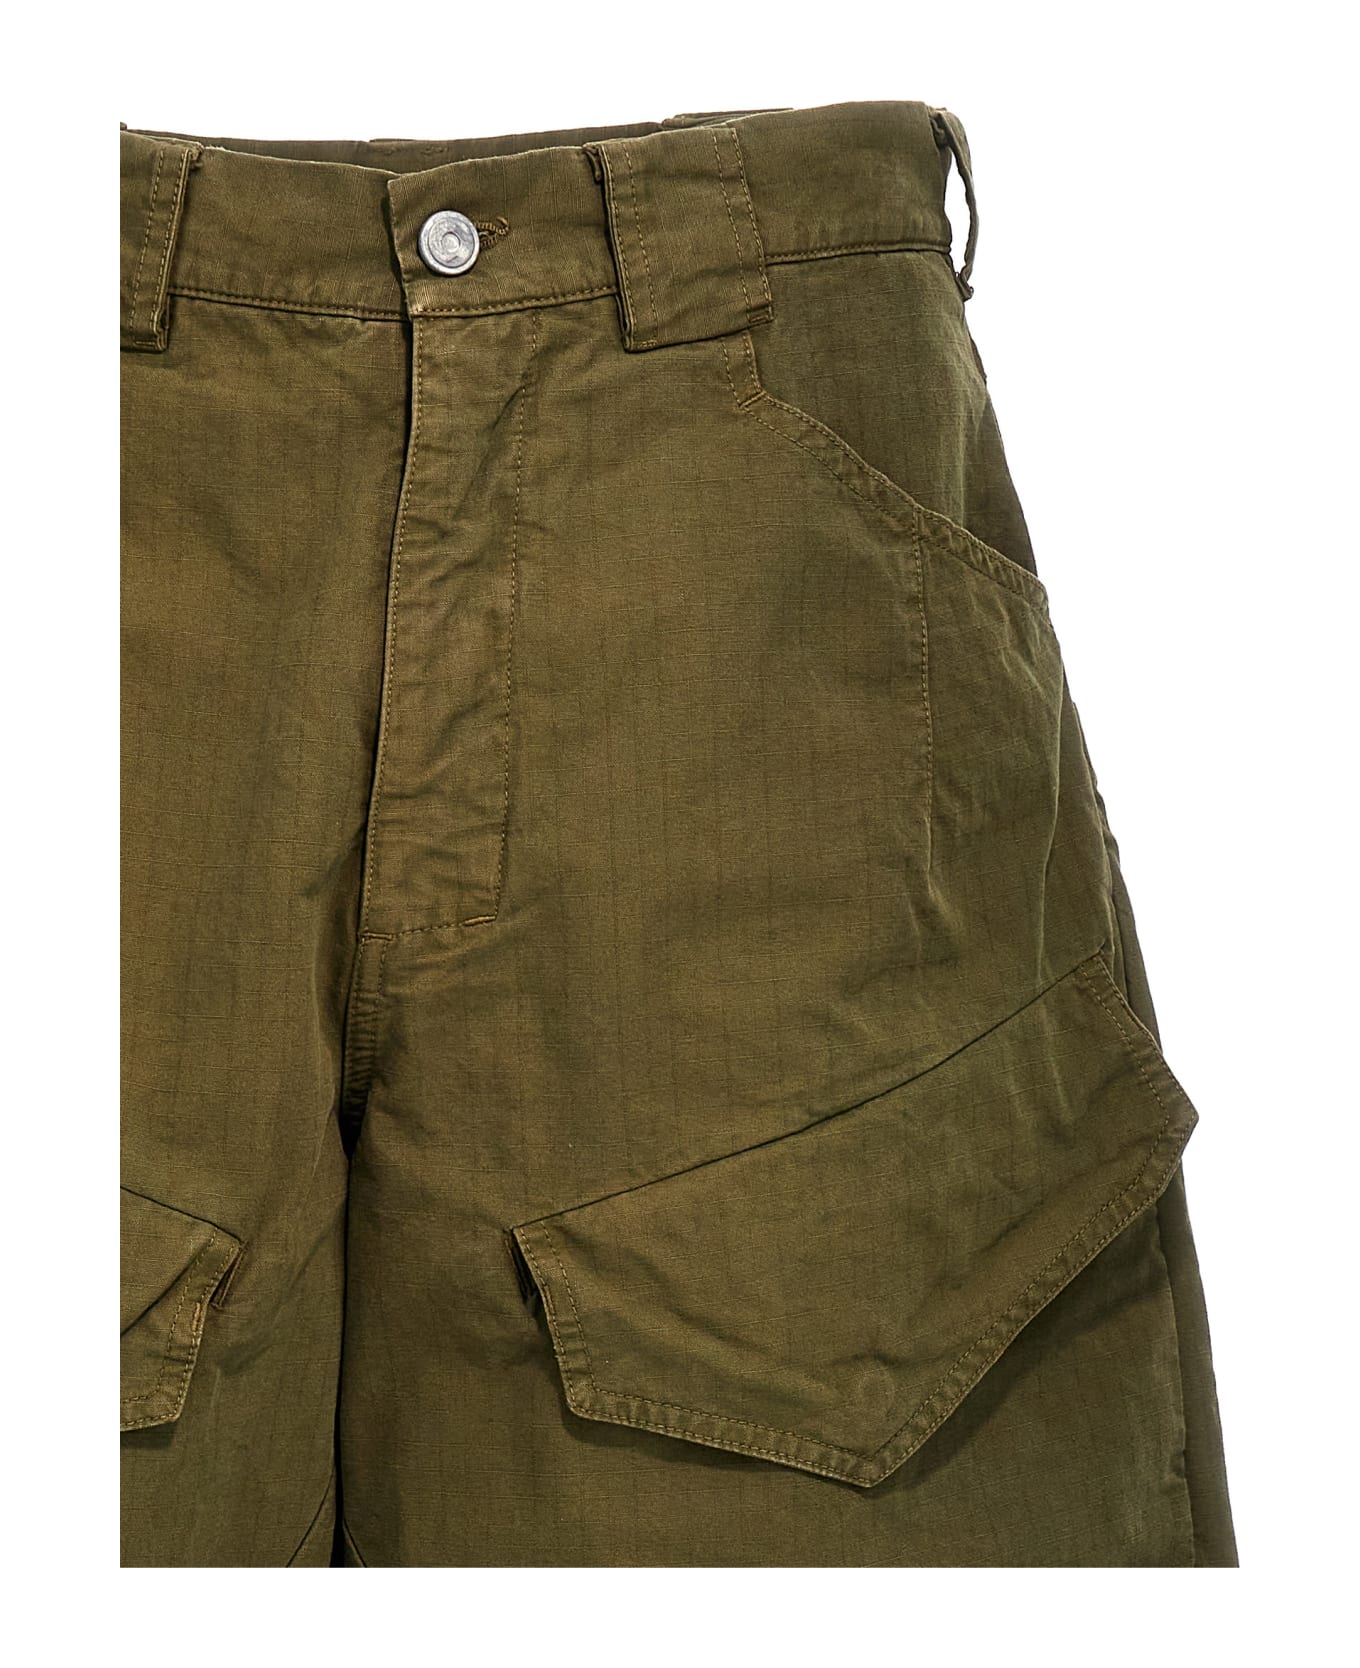 Objects Iv Life 'hiking' Pants - Green ボトムス